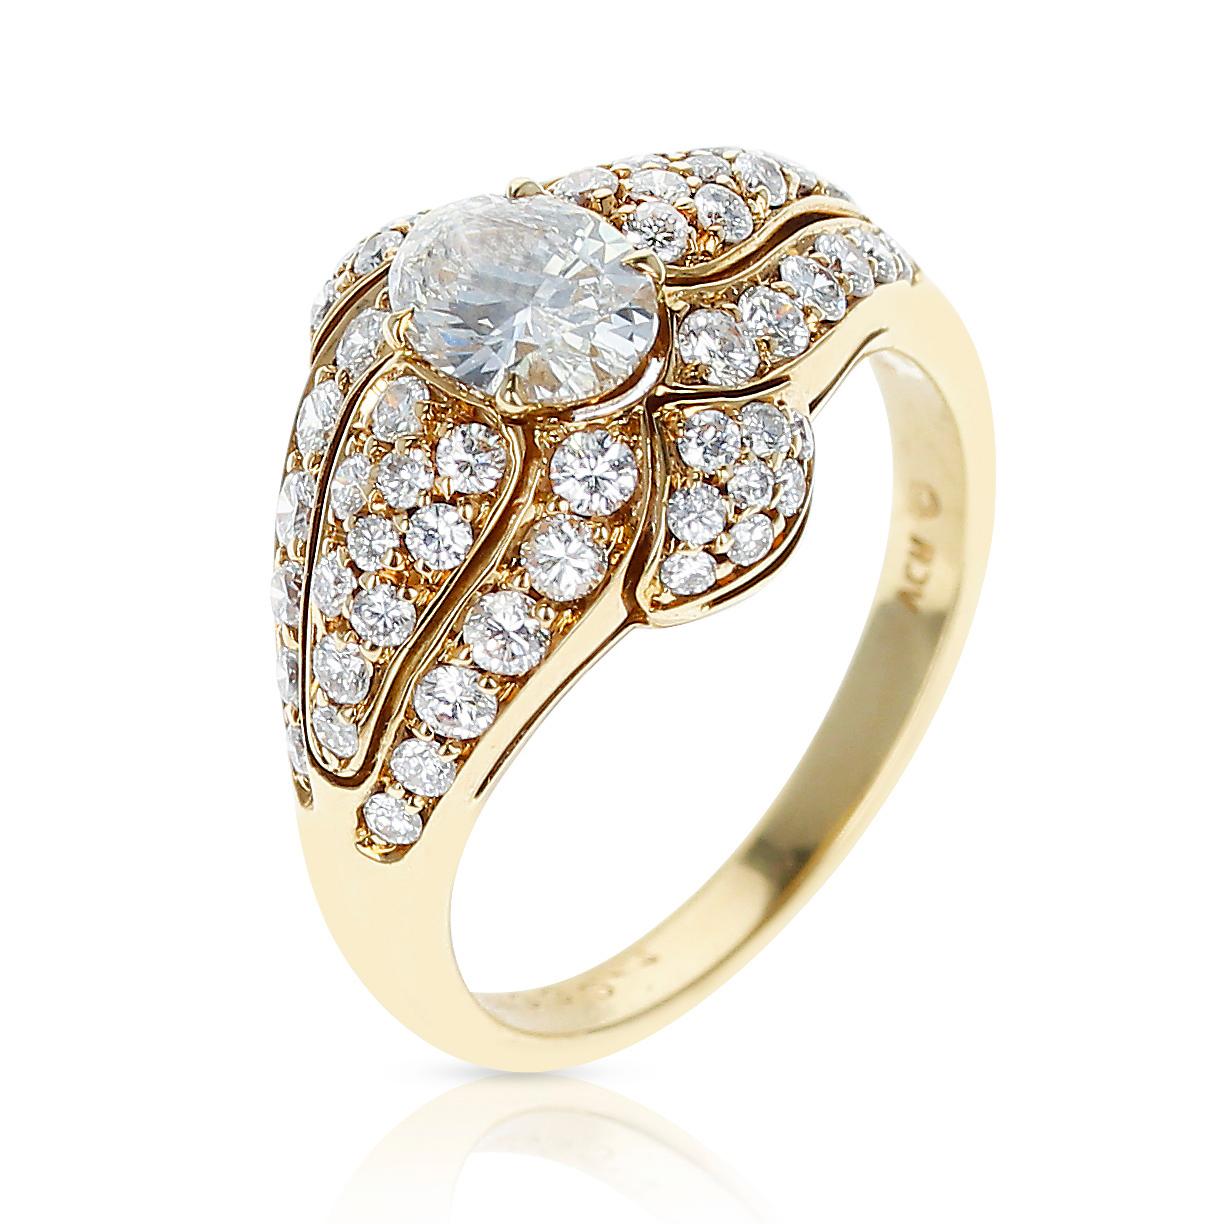 Oval Cut Van Cleef & Arpels 0.55 Carat Oval Diamond Ring Accented with Diamonds, 18K Gold